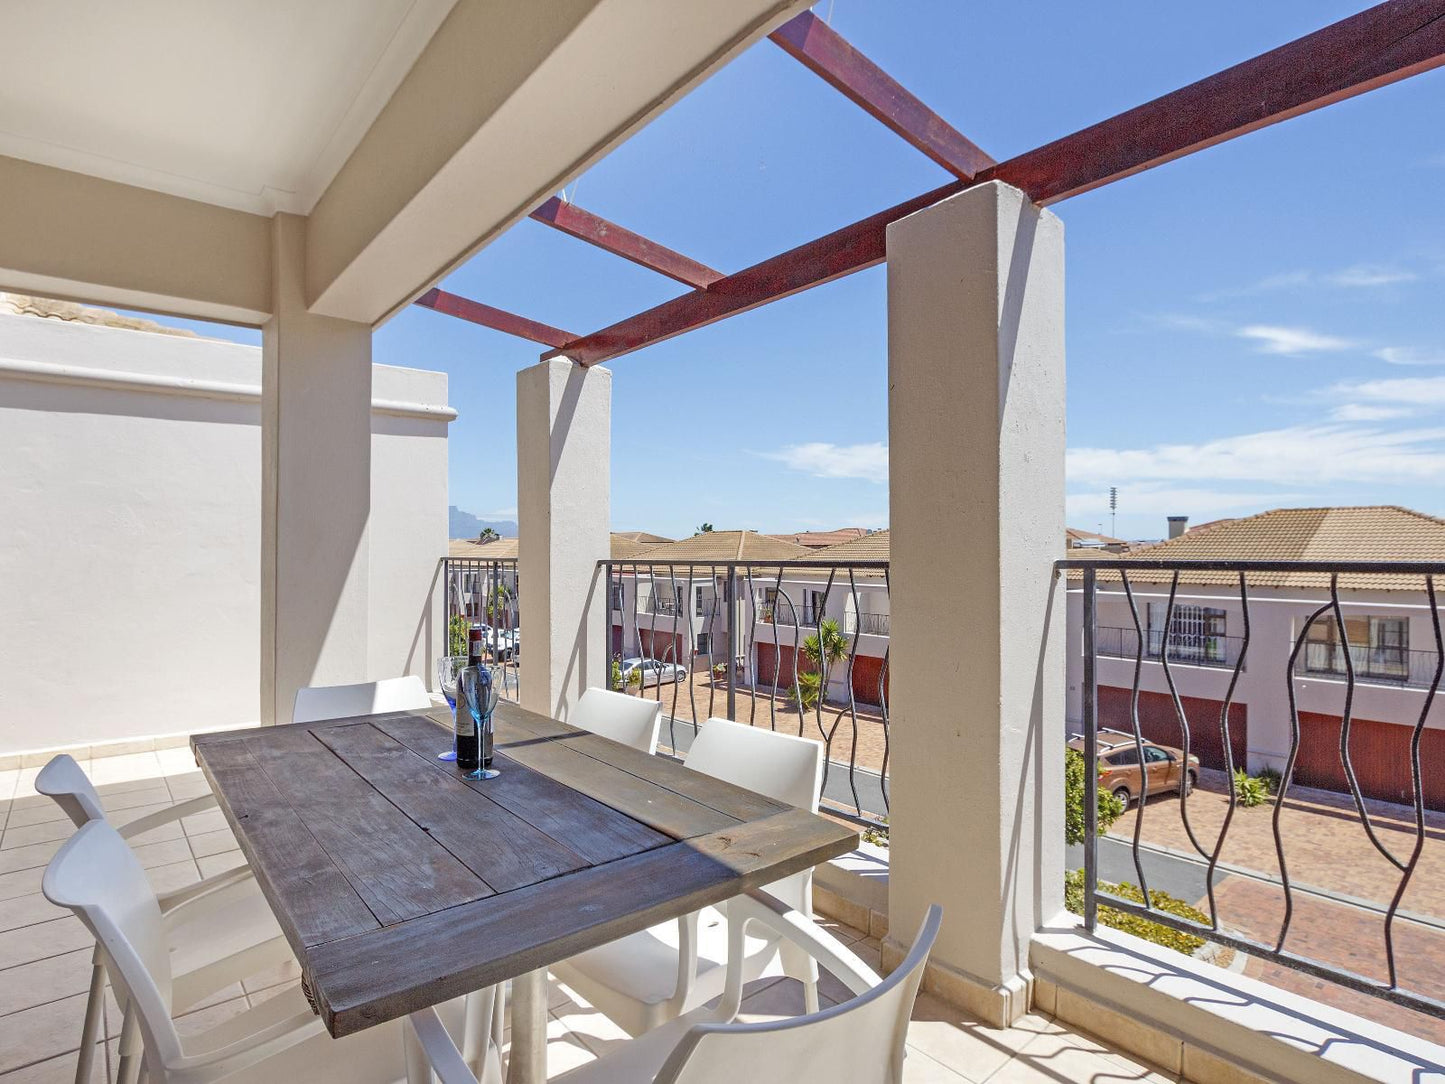 Island View 35 By Hostagents Big Bay Blouberg Western Cape South Africa Balcony, Architecture, House, Building